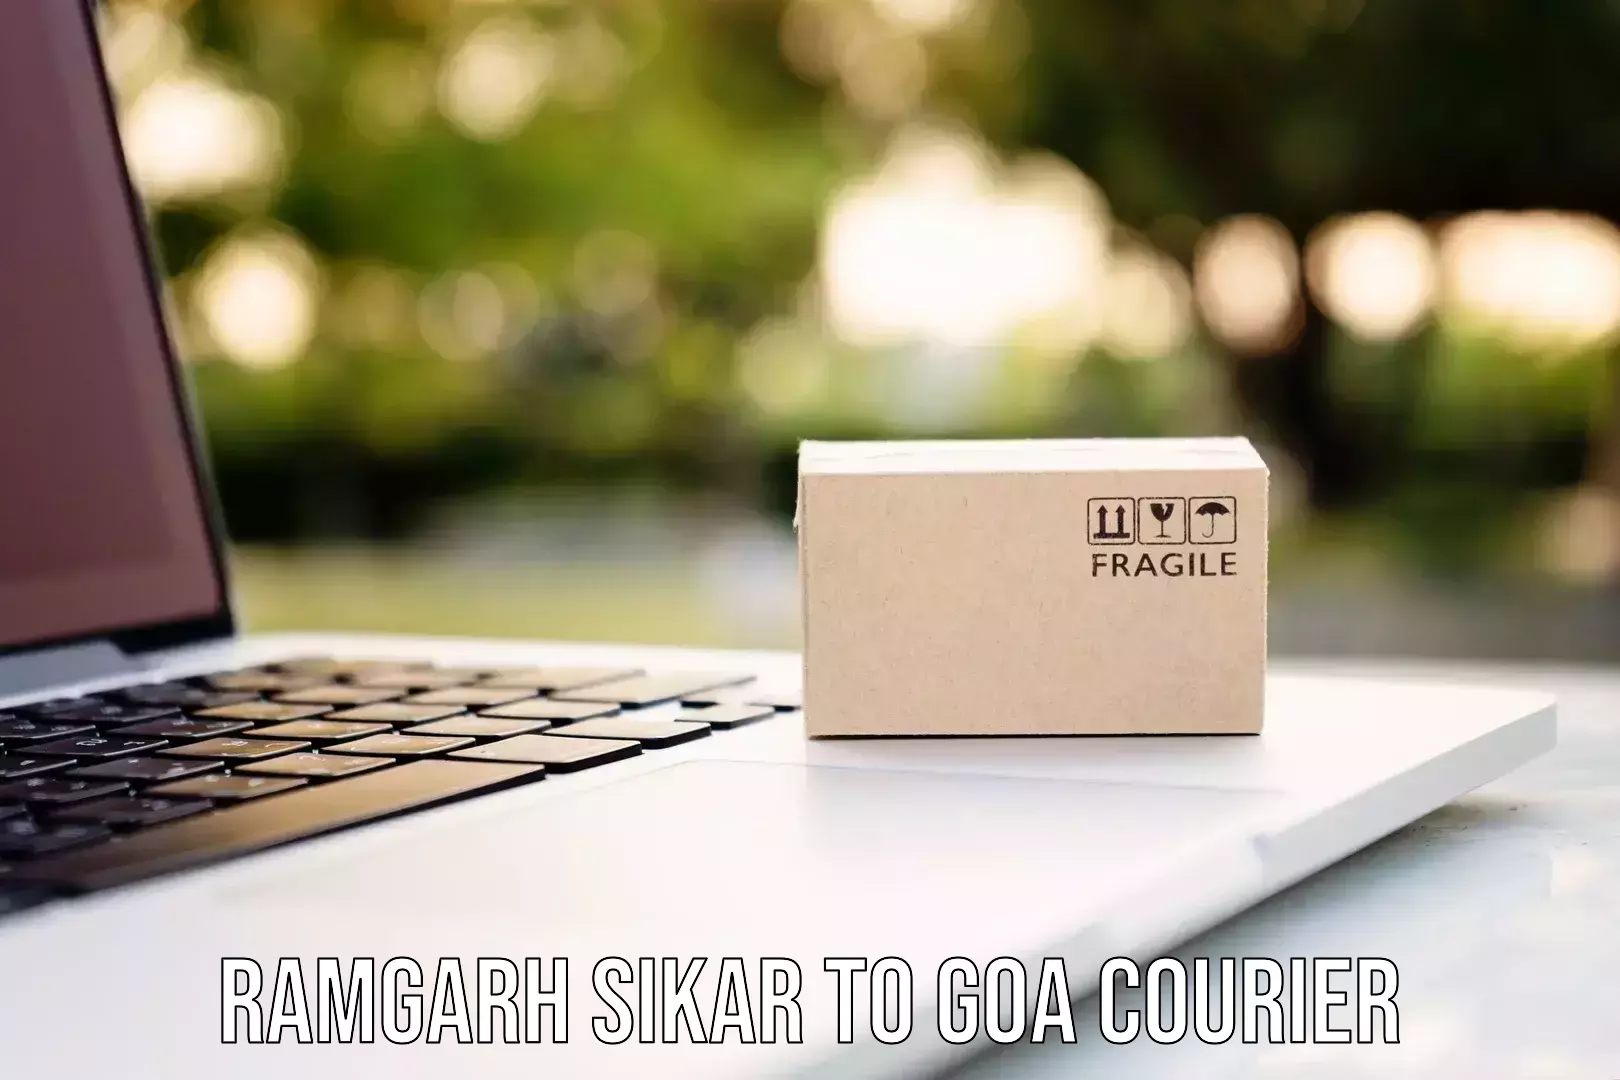 Advanced package delivery Ramgarh Sikar to Goa